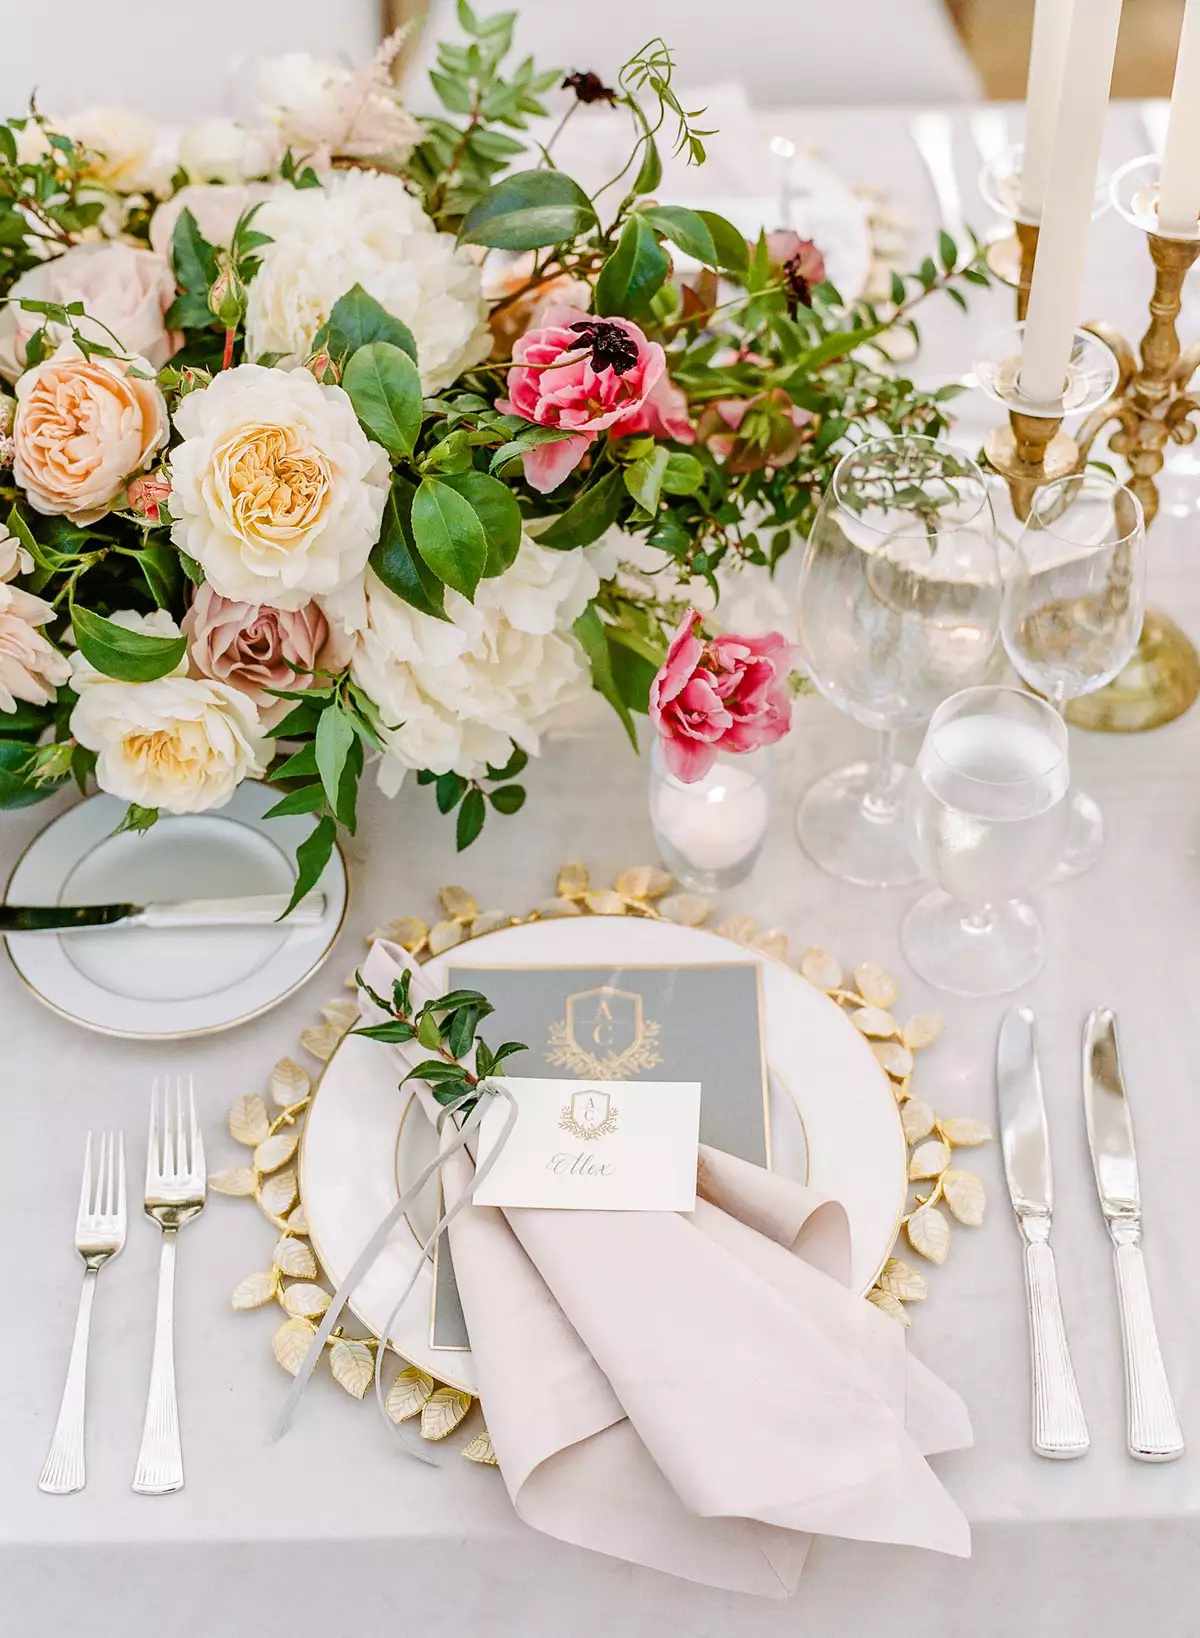 Place setting with gold leaf charger, pink napkin, gray menu, and pink and white floral arrangements